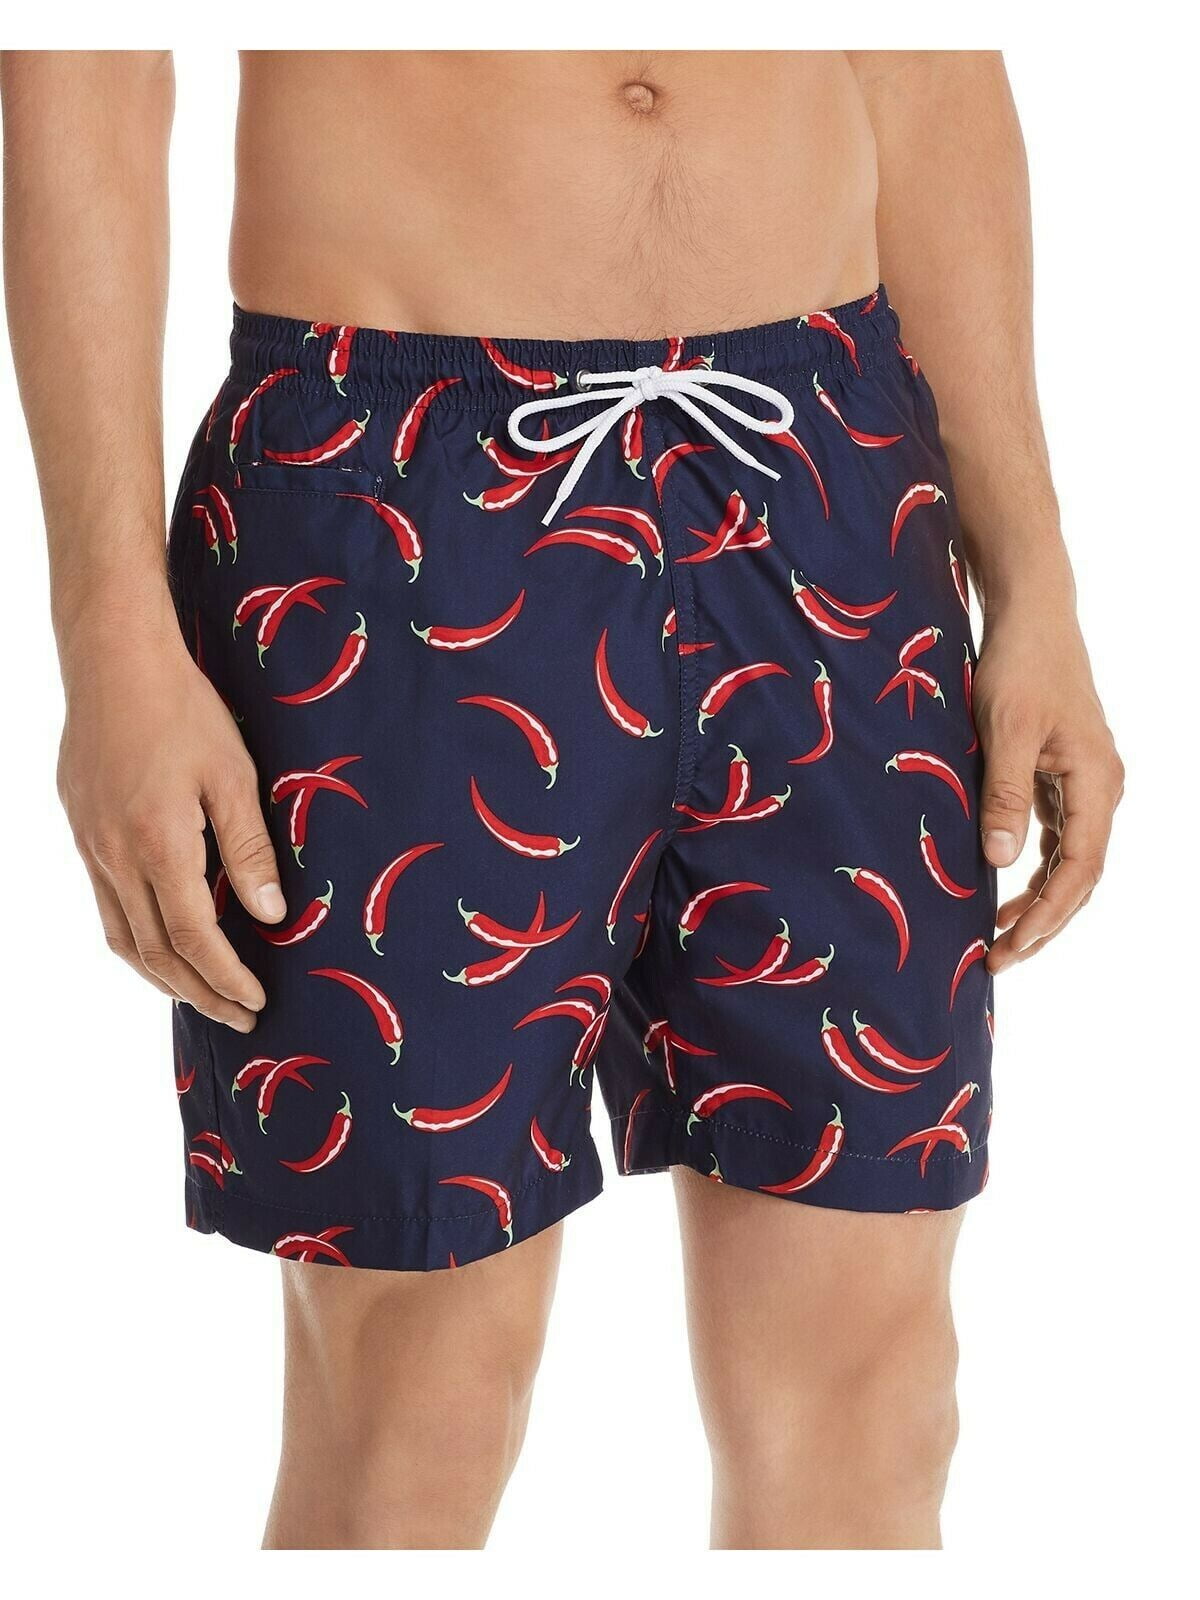 Mens Swim Trunks Chili Pepper Pattern Quick Dry Beach Board Shorts with Mesh Lining 